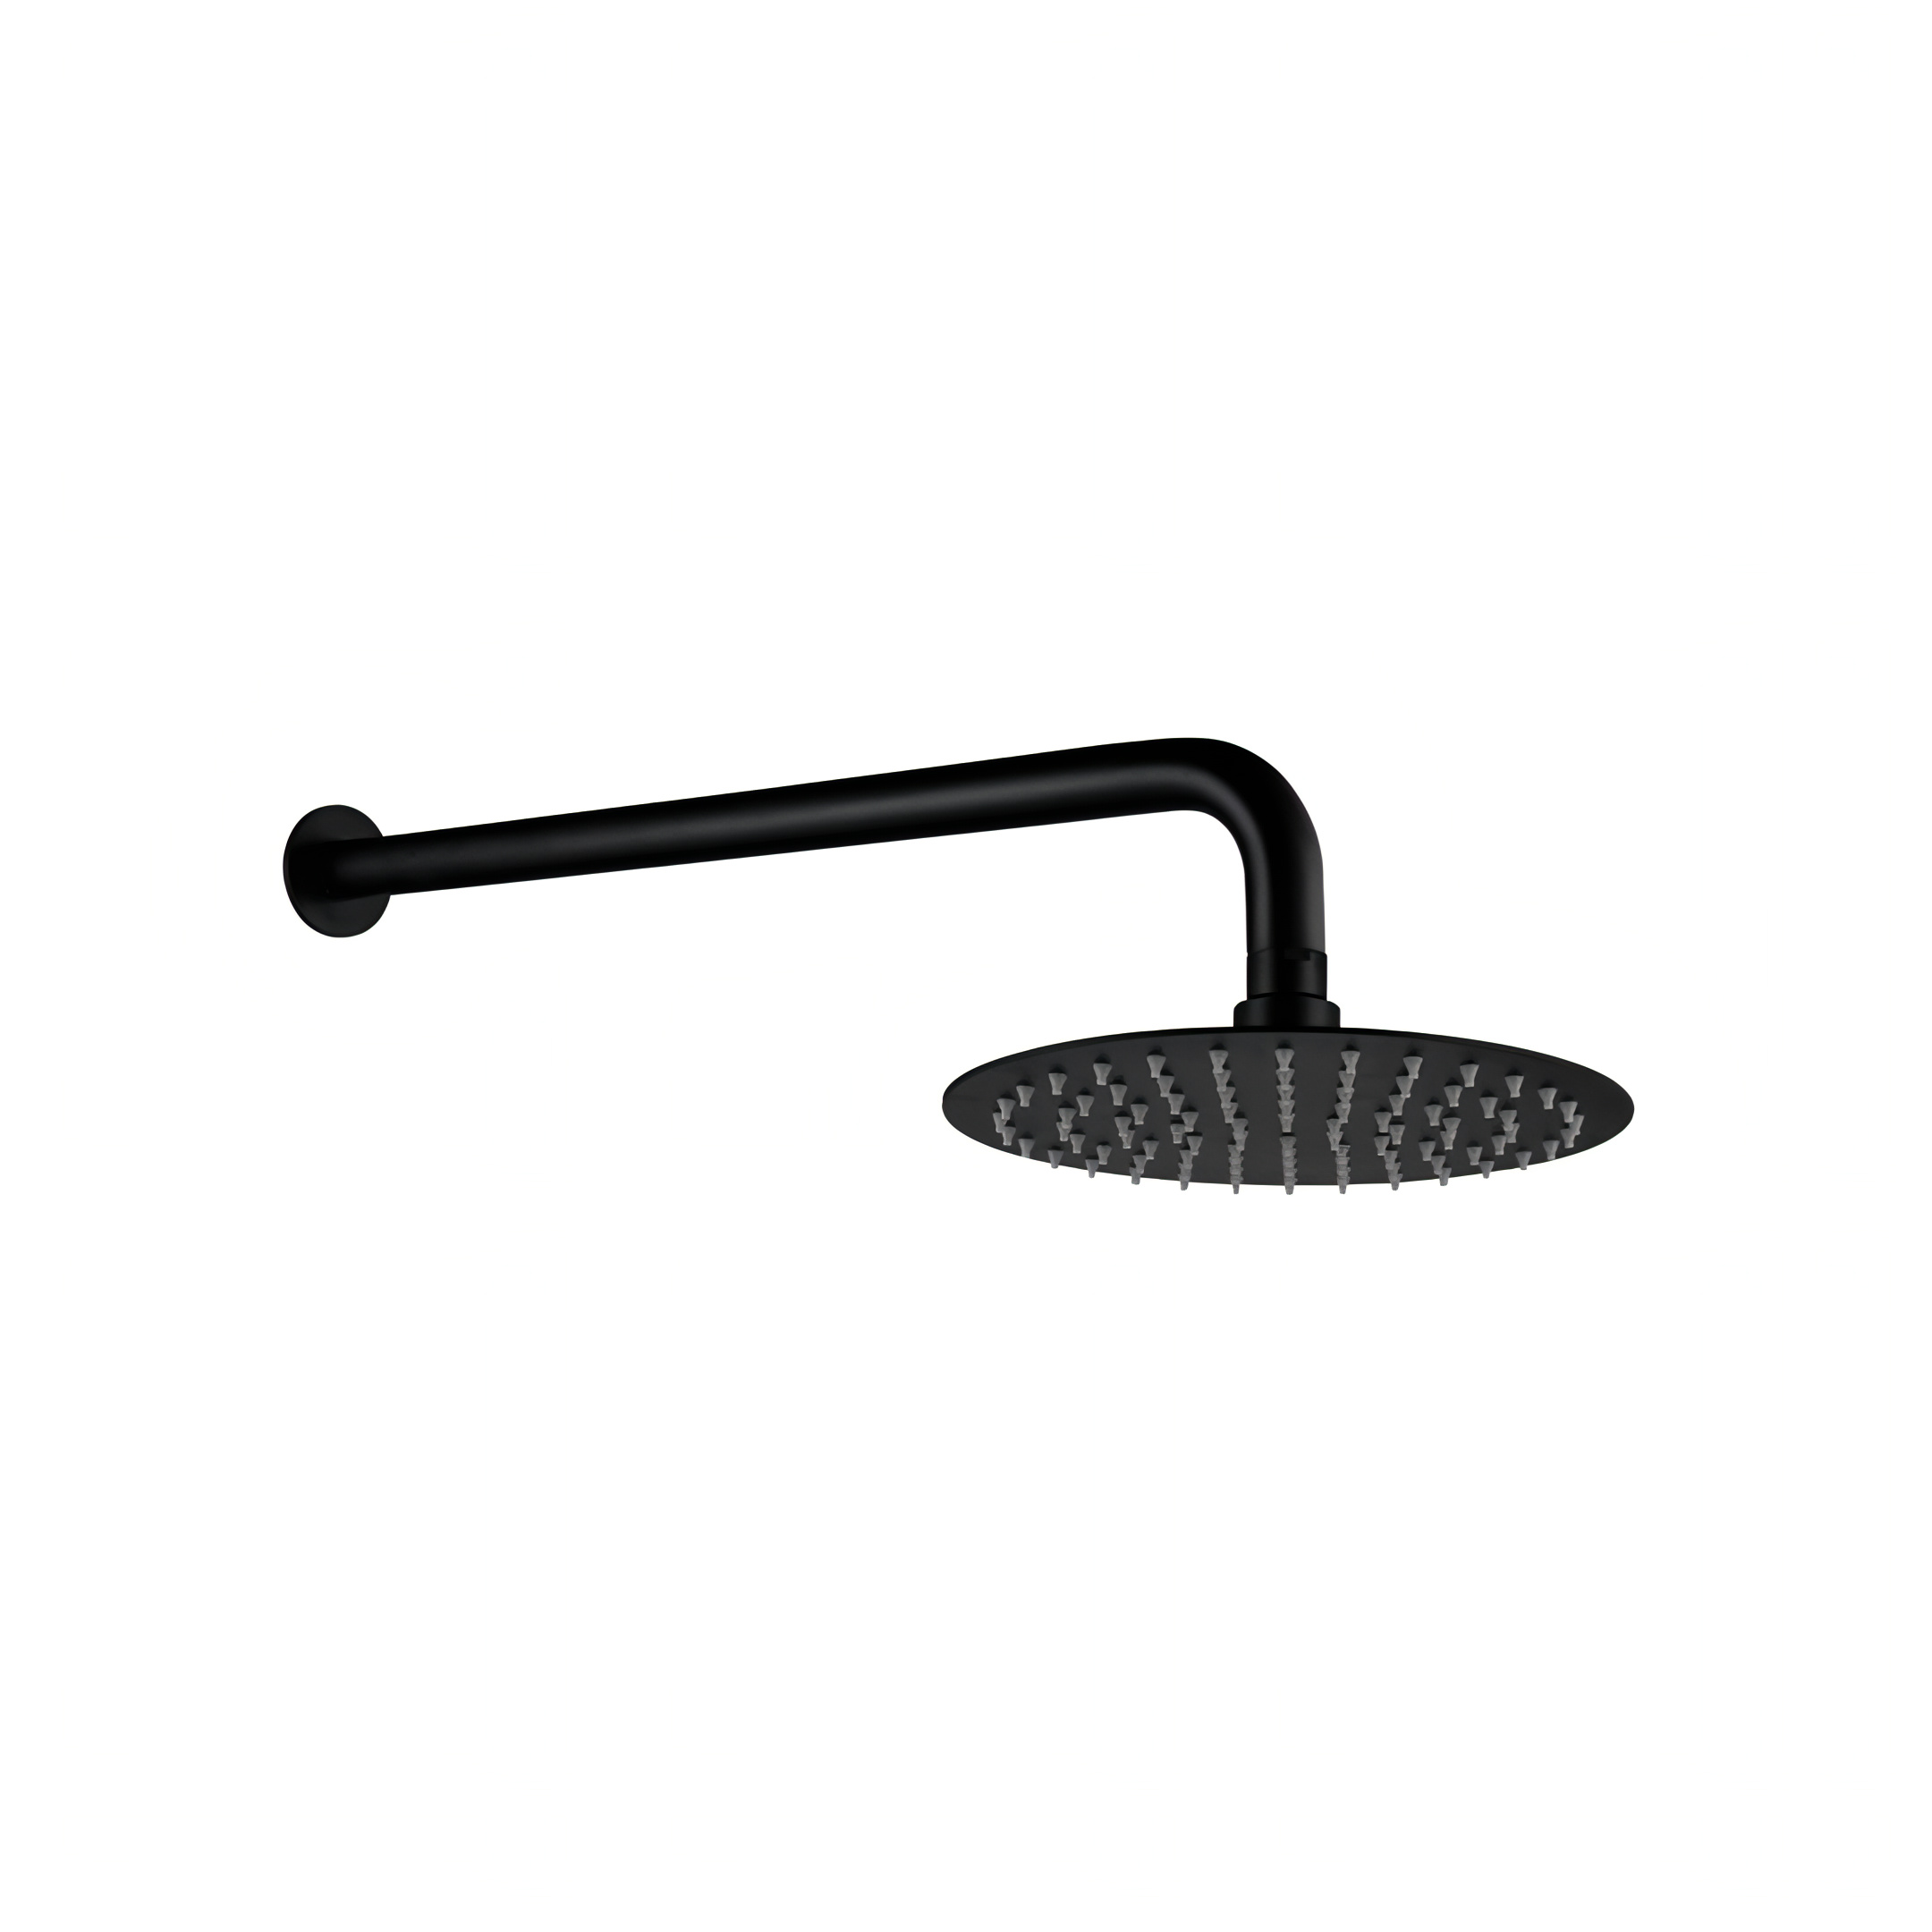 HELLYCAR CHRIS WALL SHOWER ARM AND SHOWER HEAD BLACK 200MM